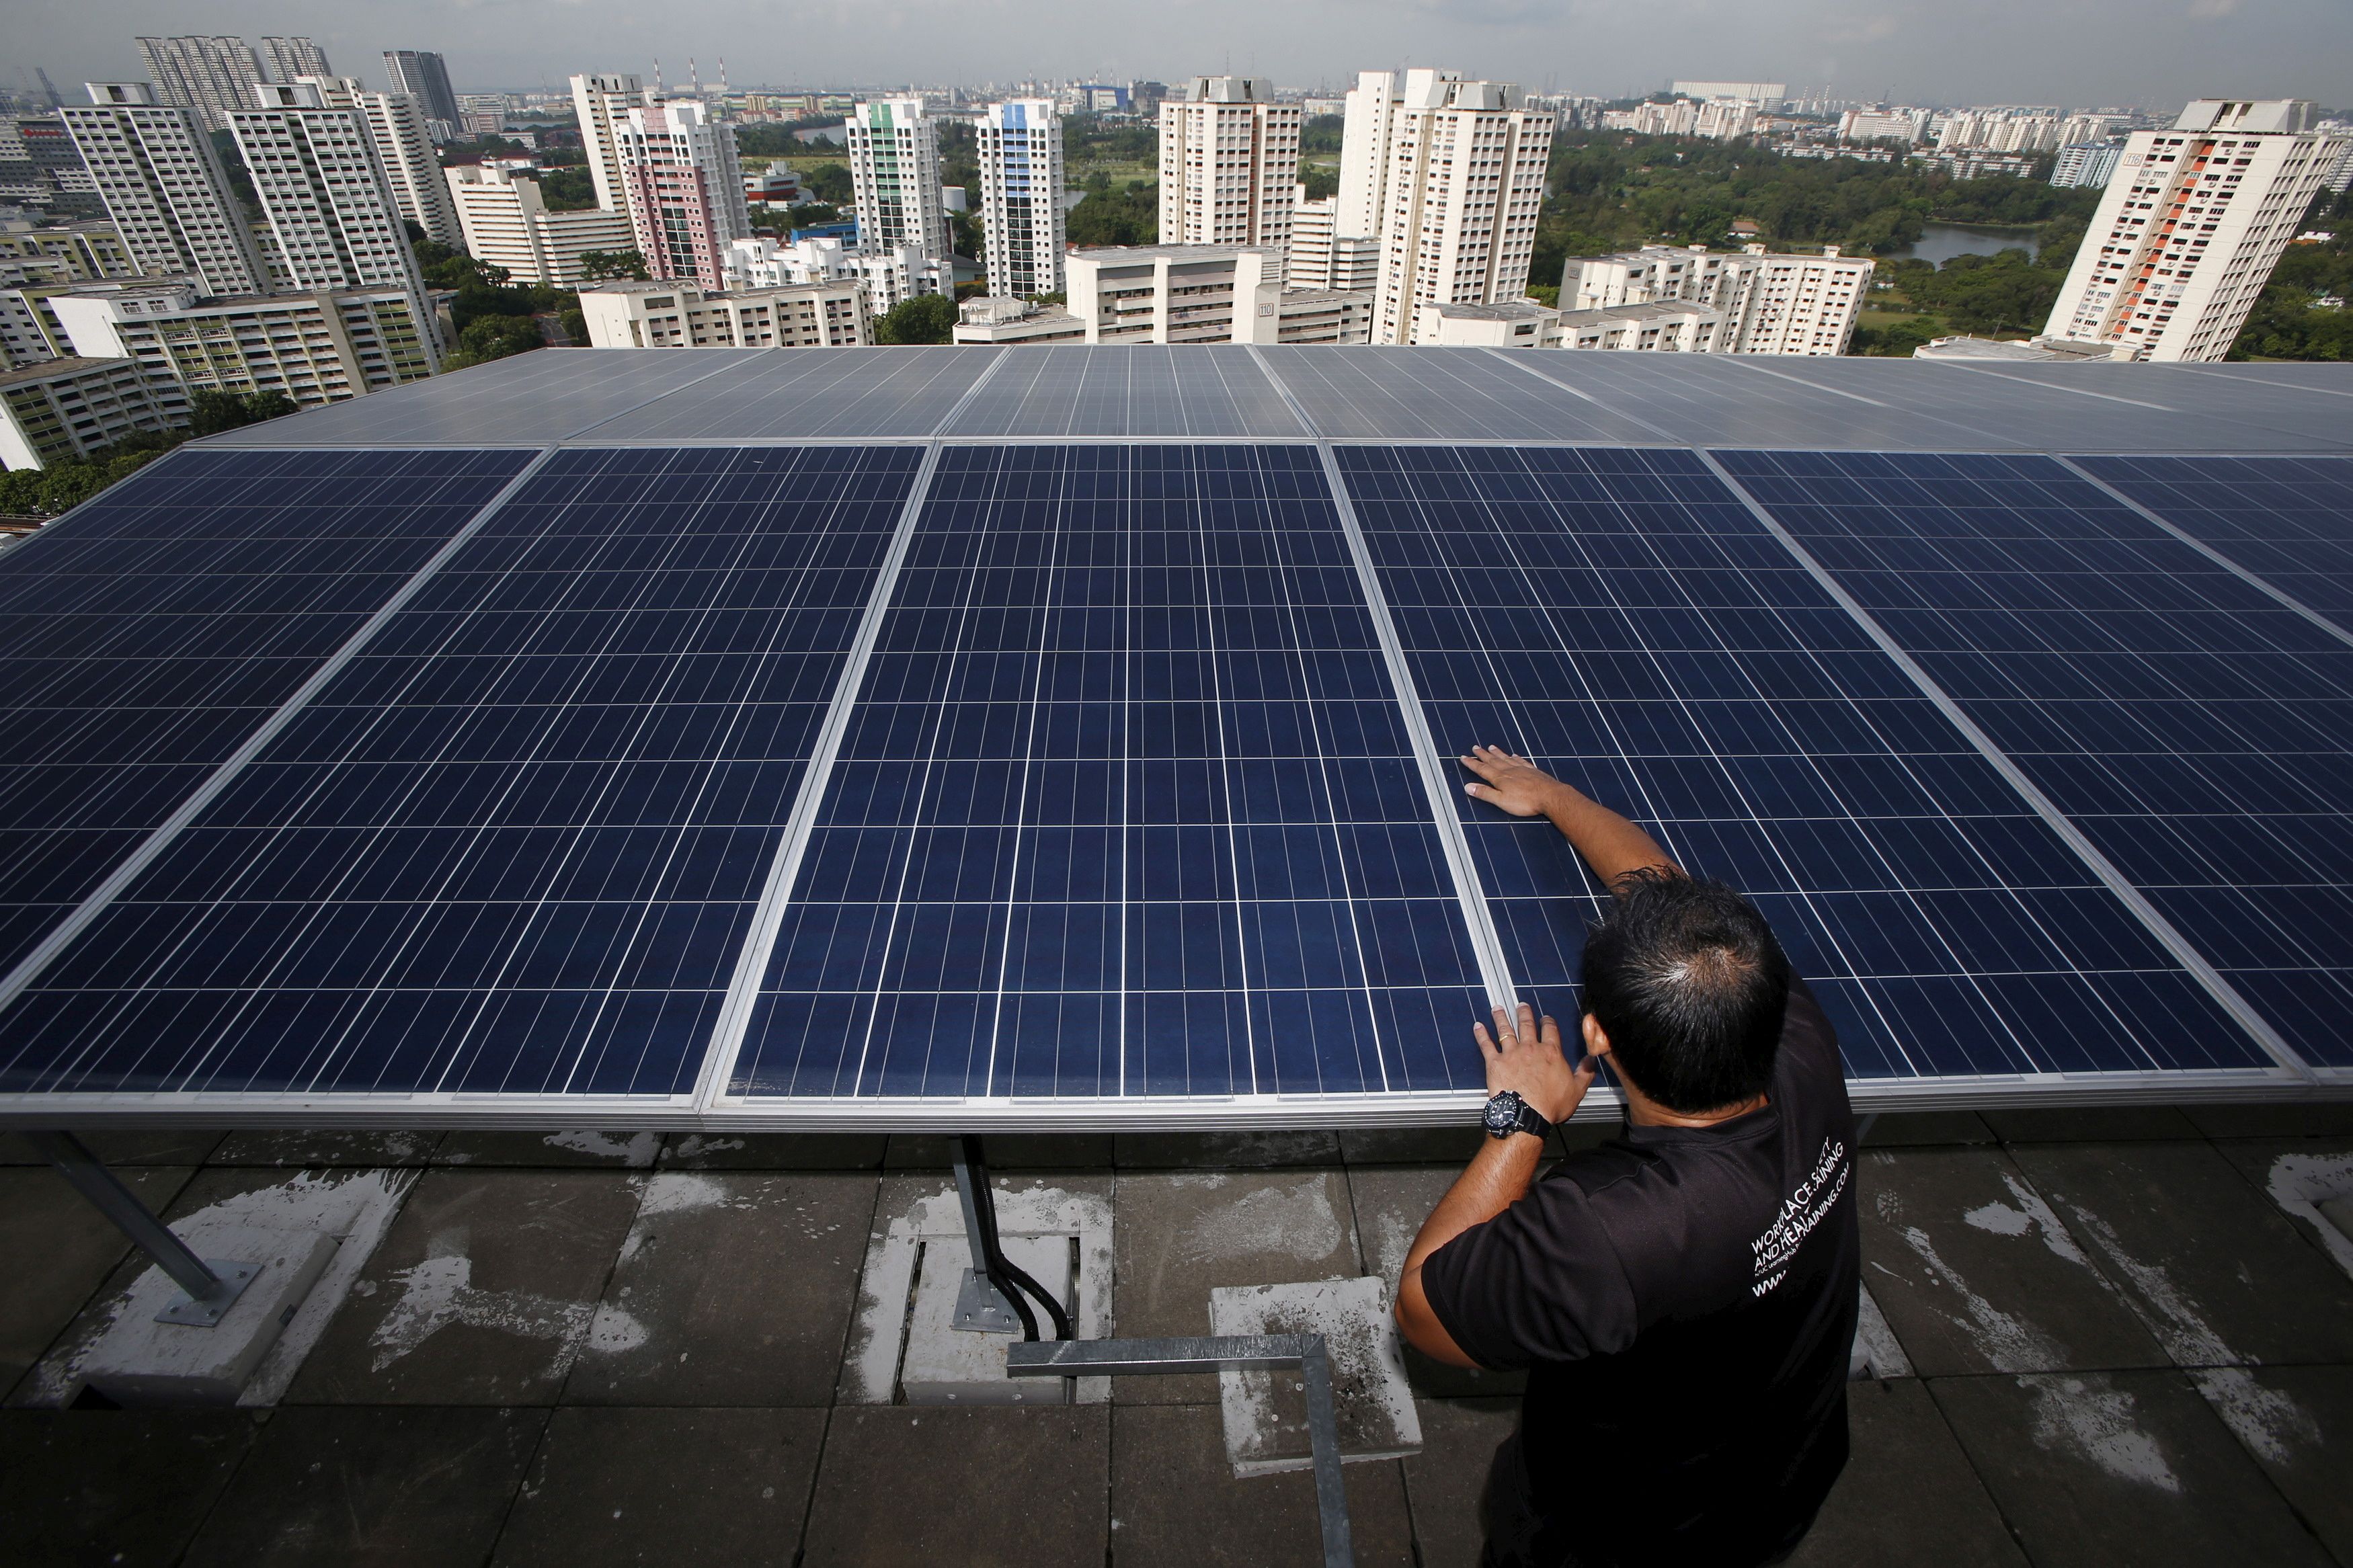 Maintenance officer Wilson Ting inspects photovoltaic solar modules on top of a block of public housing estate apartments in Singapore